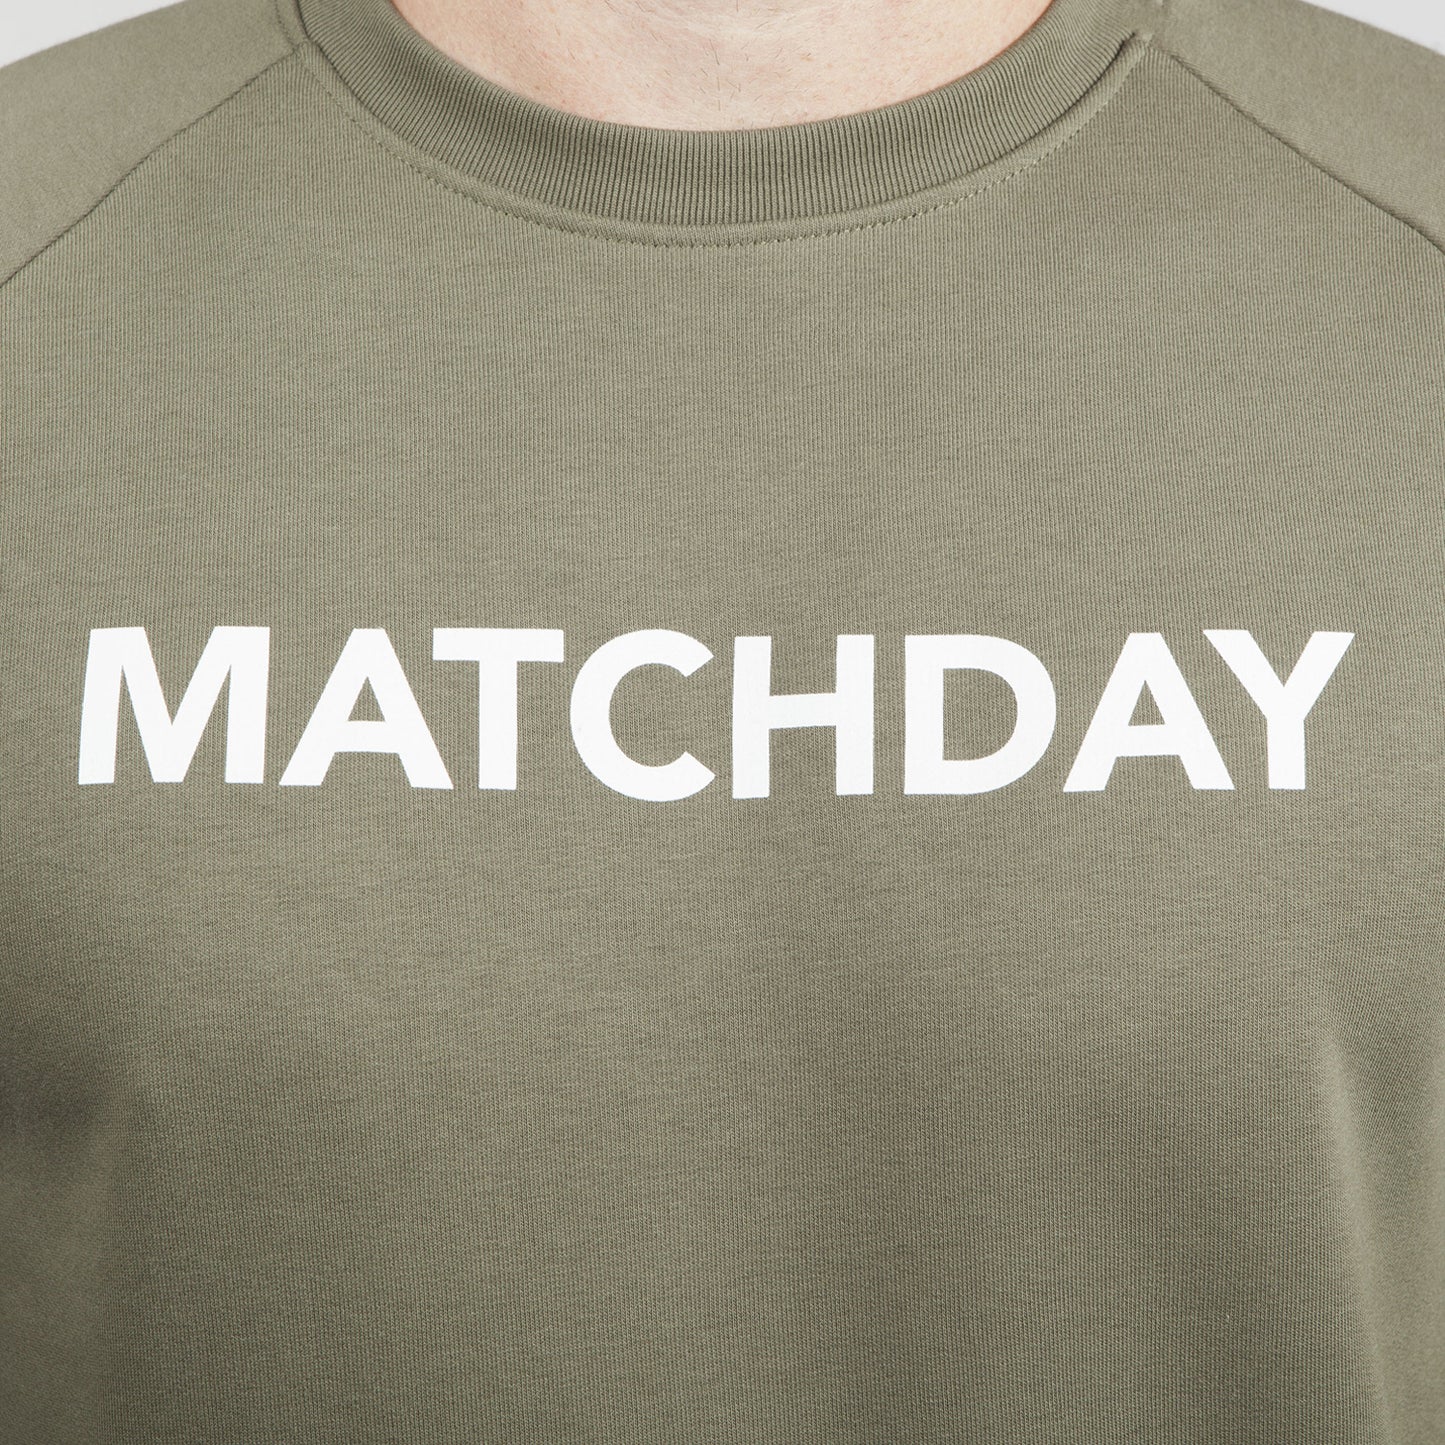 MATCHDAY SWEATER (Olive)